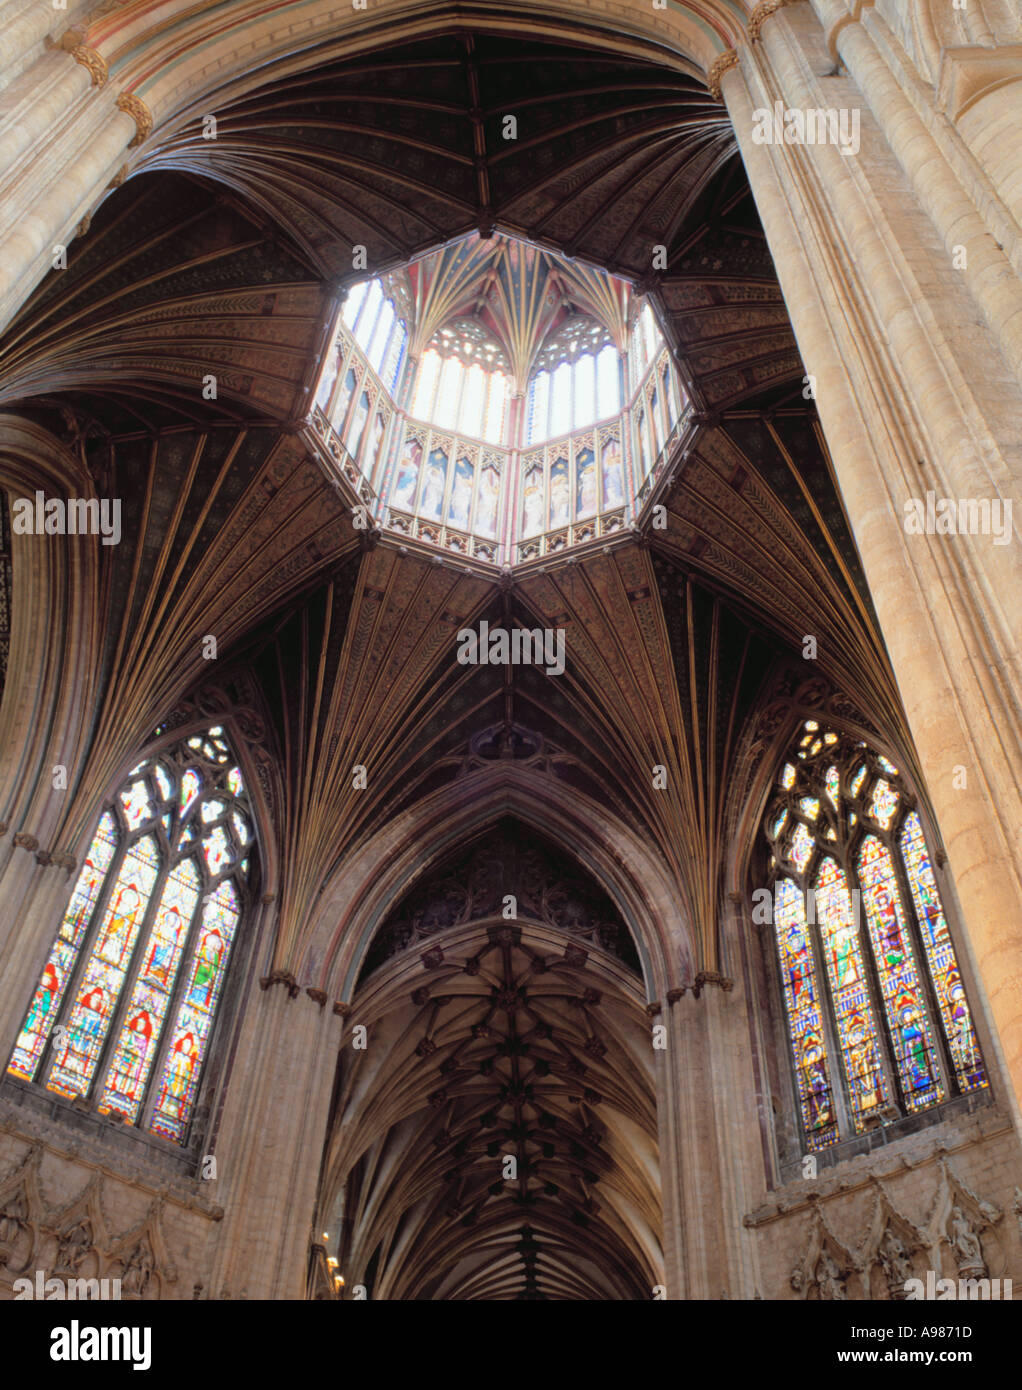 Stained glass windows and the Central Octagon of Ely Cathedral, Ely, Cambridgeshire, England, UK. Stock Photo